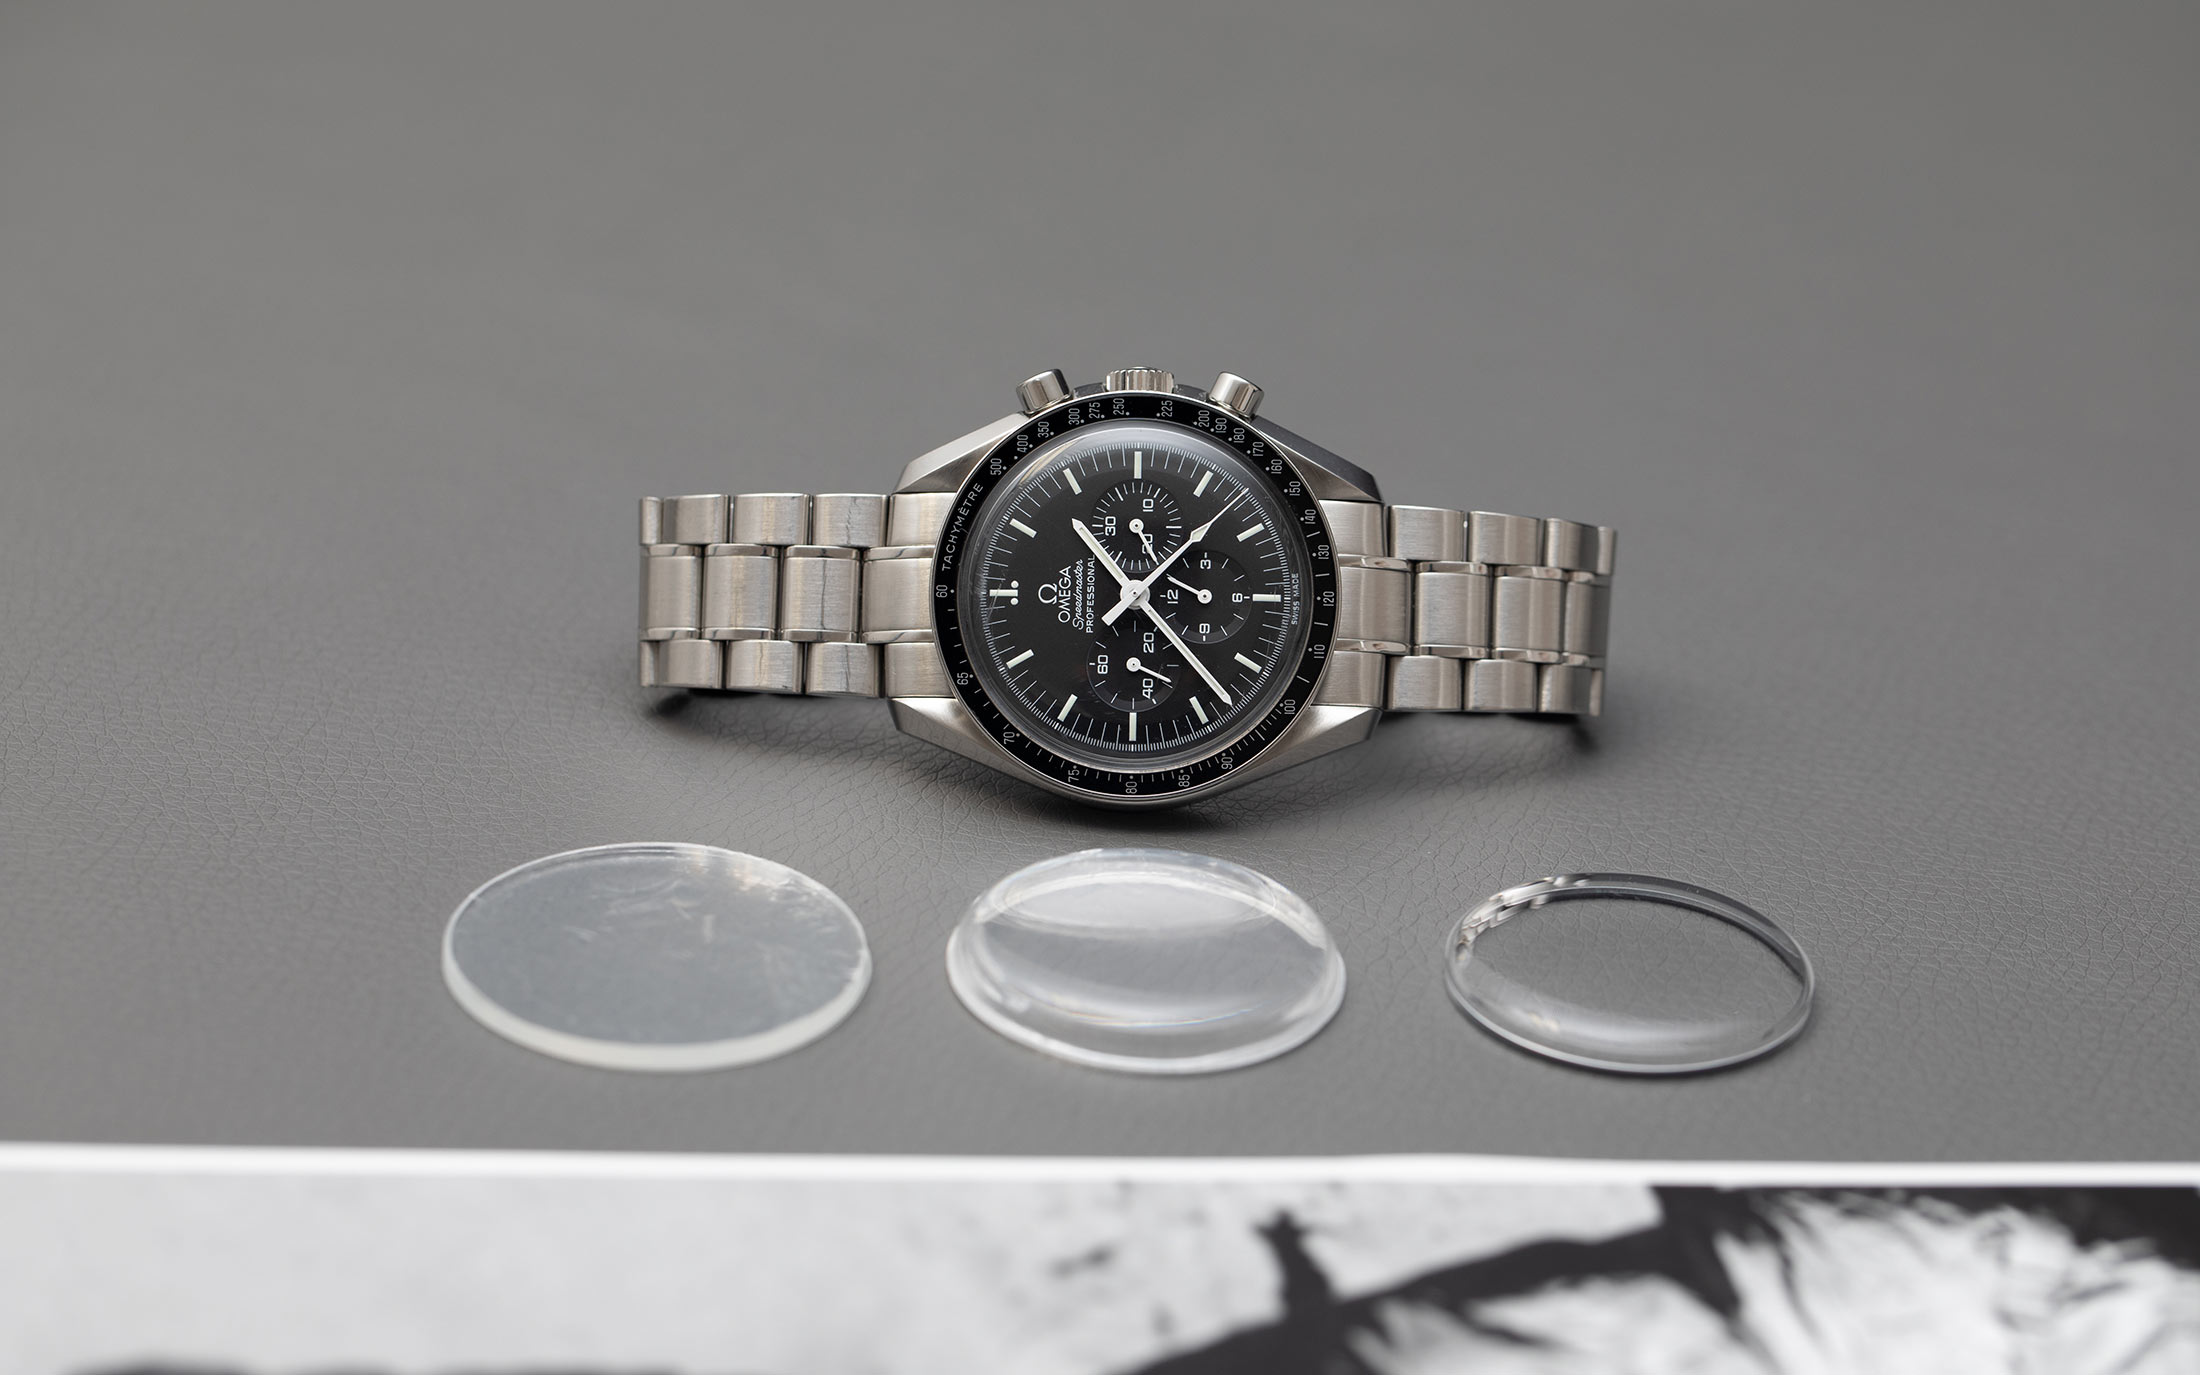 Omega Speedmaster Moonwatch Professional Master Chronometer Chronograph  42mm Watch, Silver and Black, O31030425001001